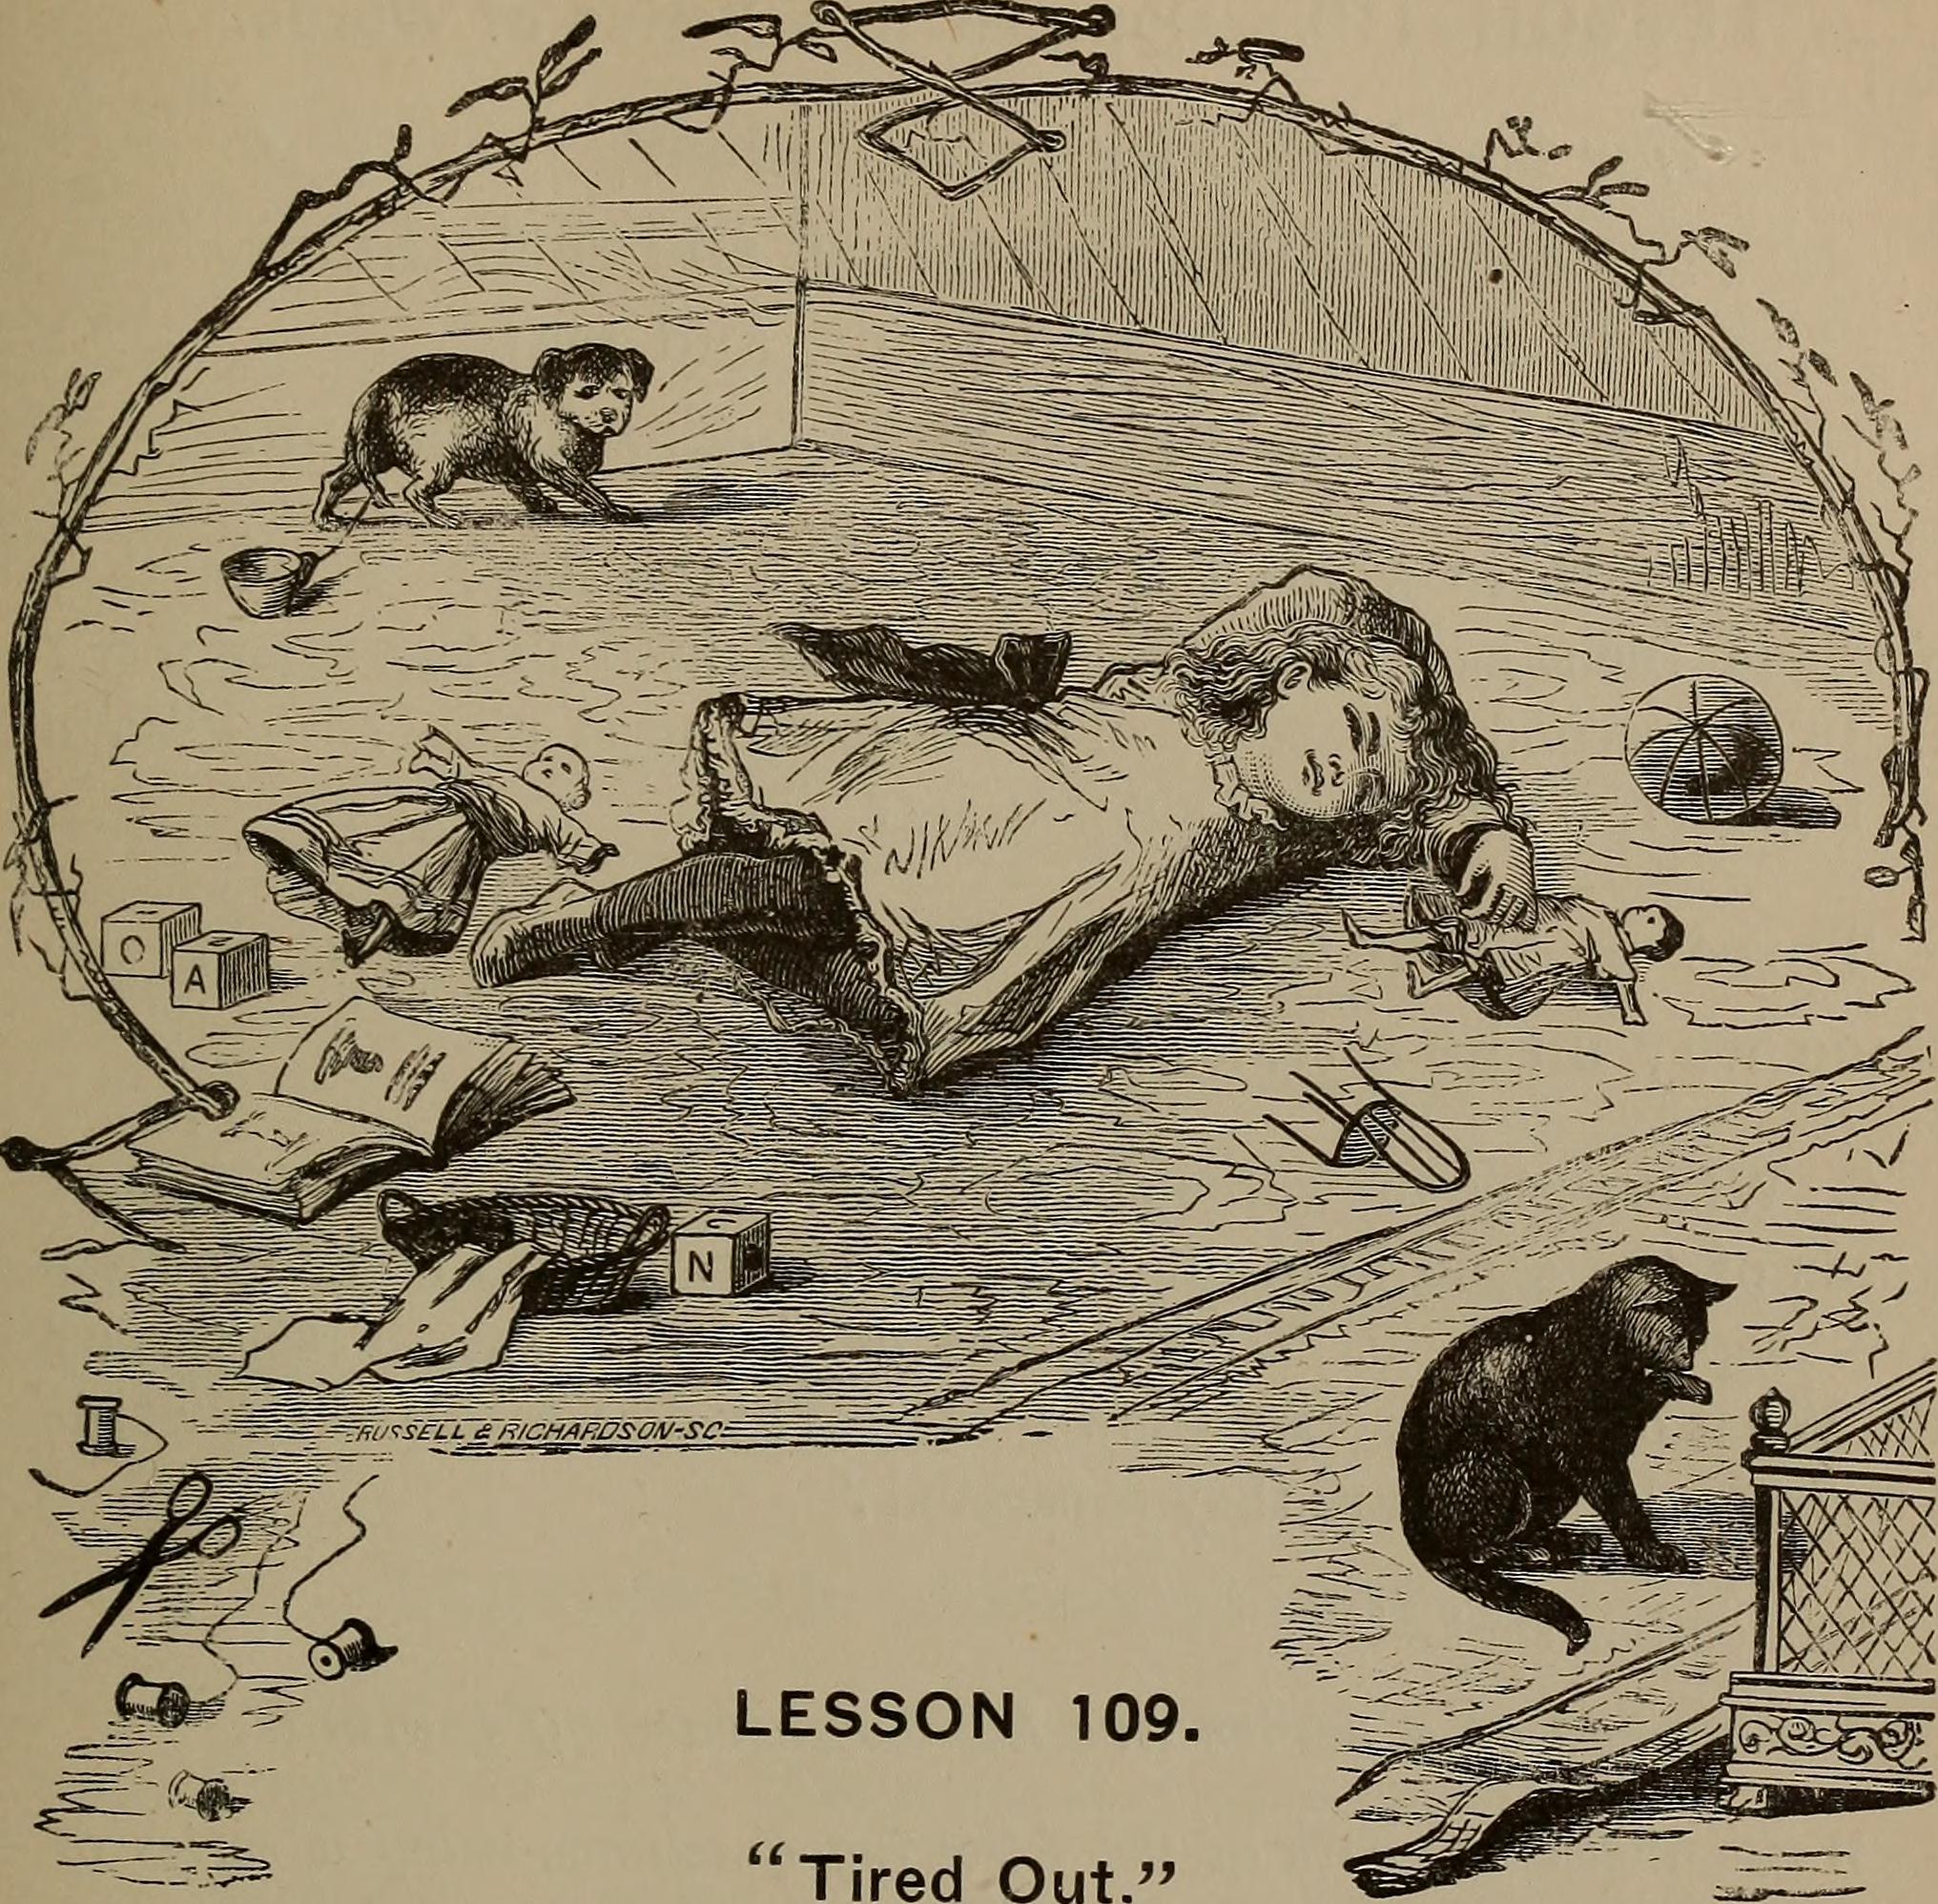 Image from page 69 of "First lessons in language" (1891)